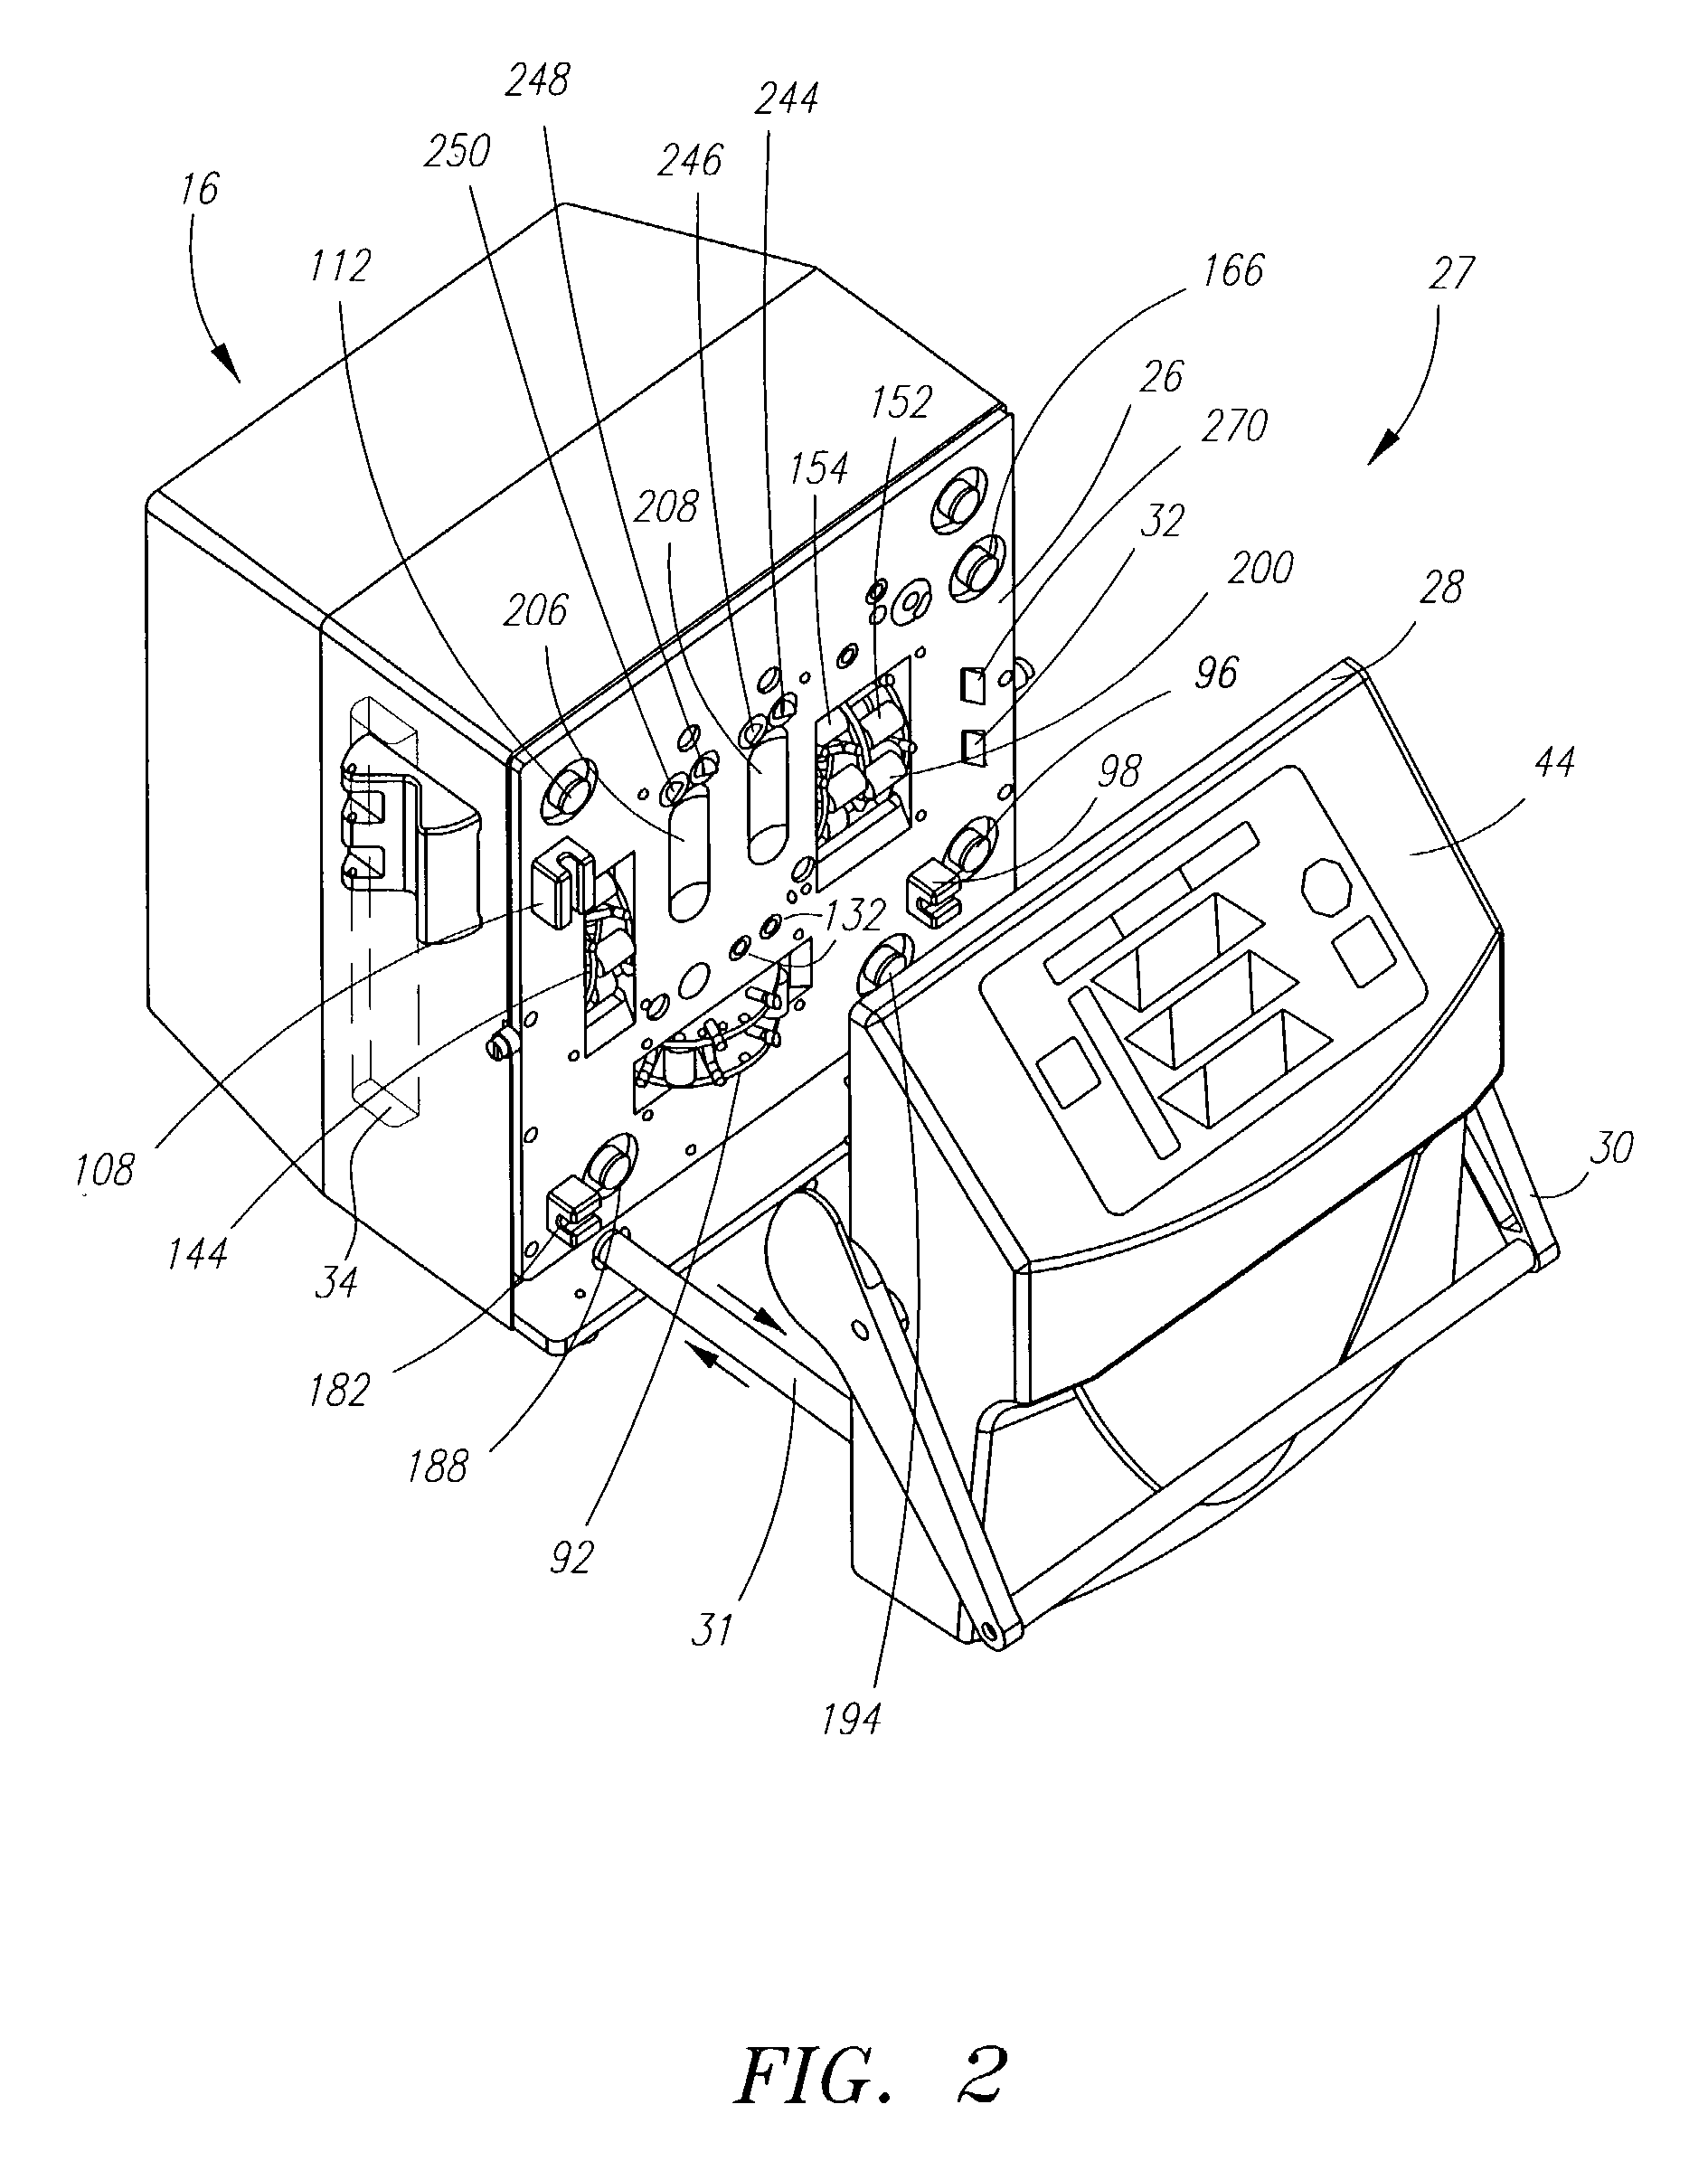 Systems and methods for performing blood processing and/or fluid exchange procedures